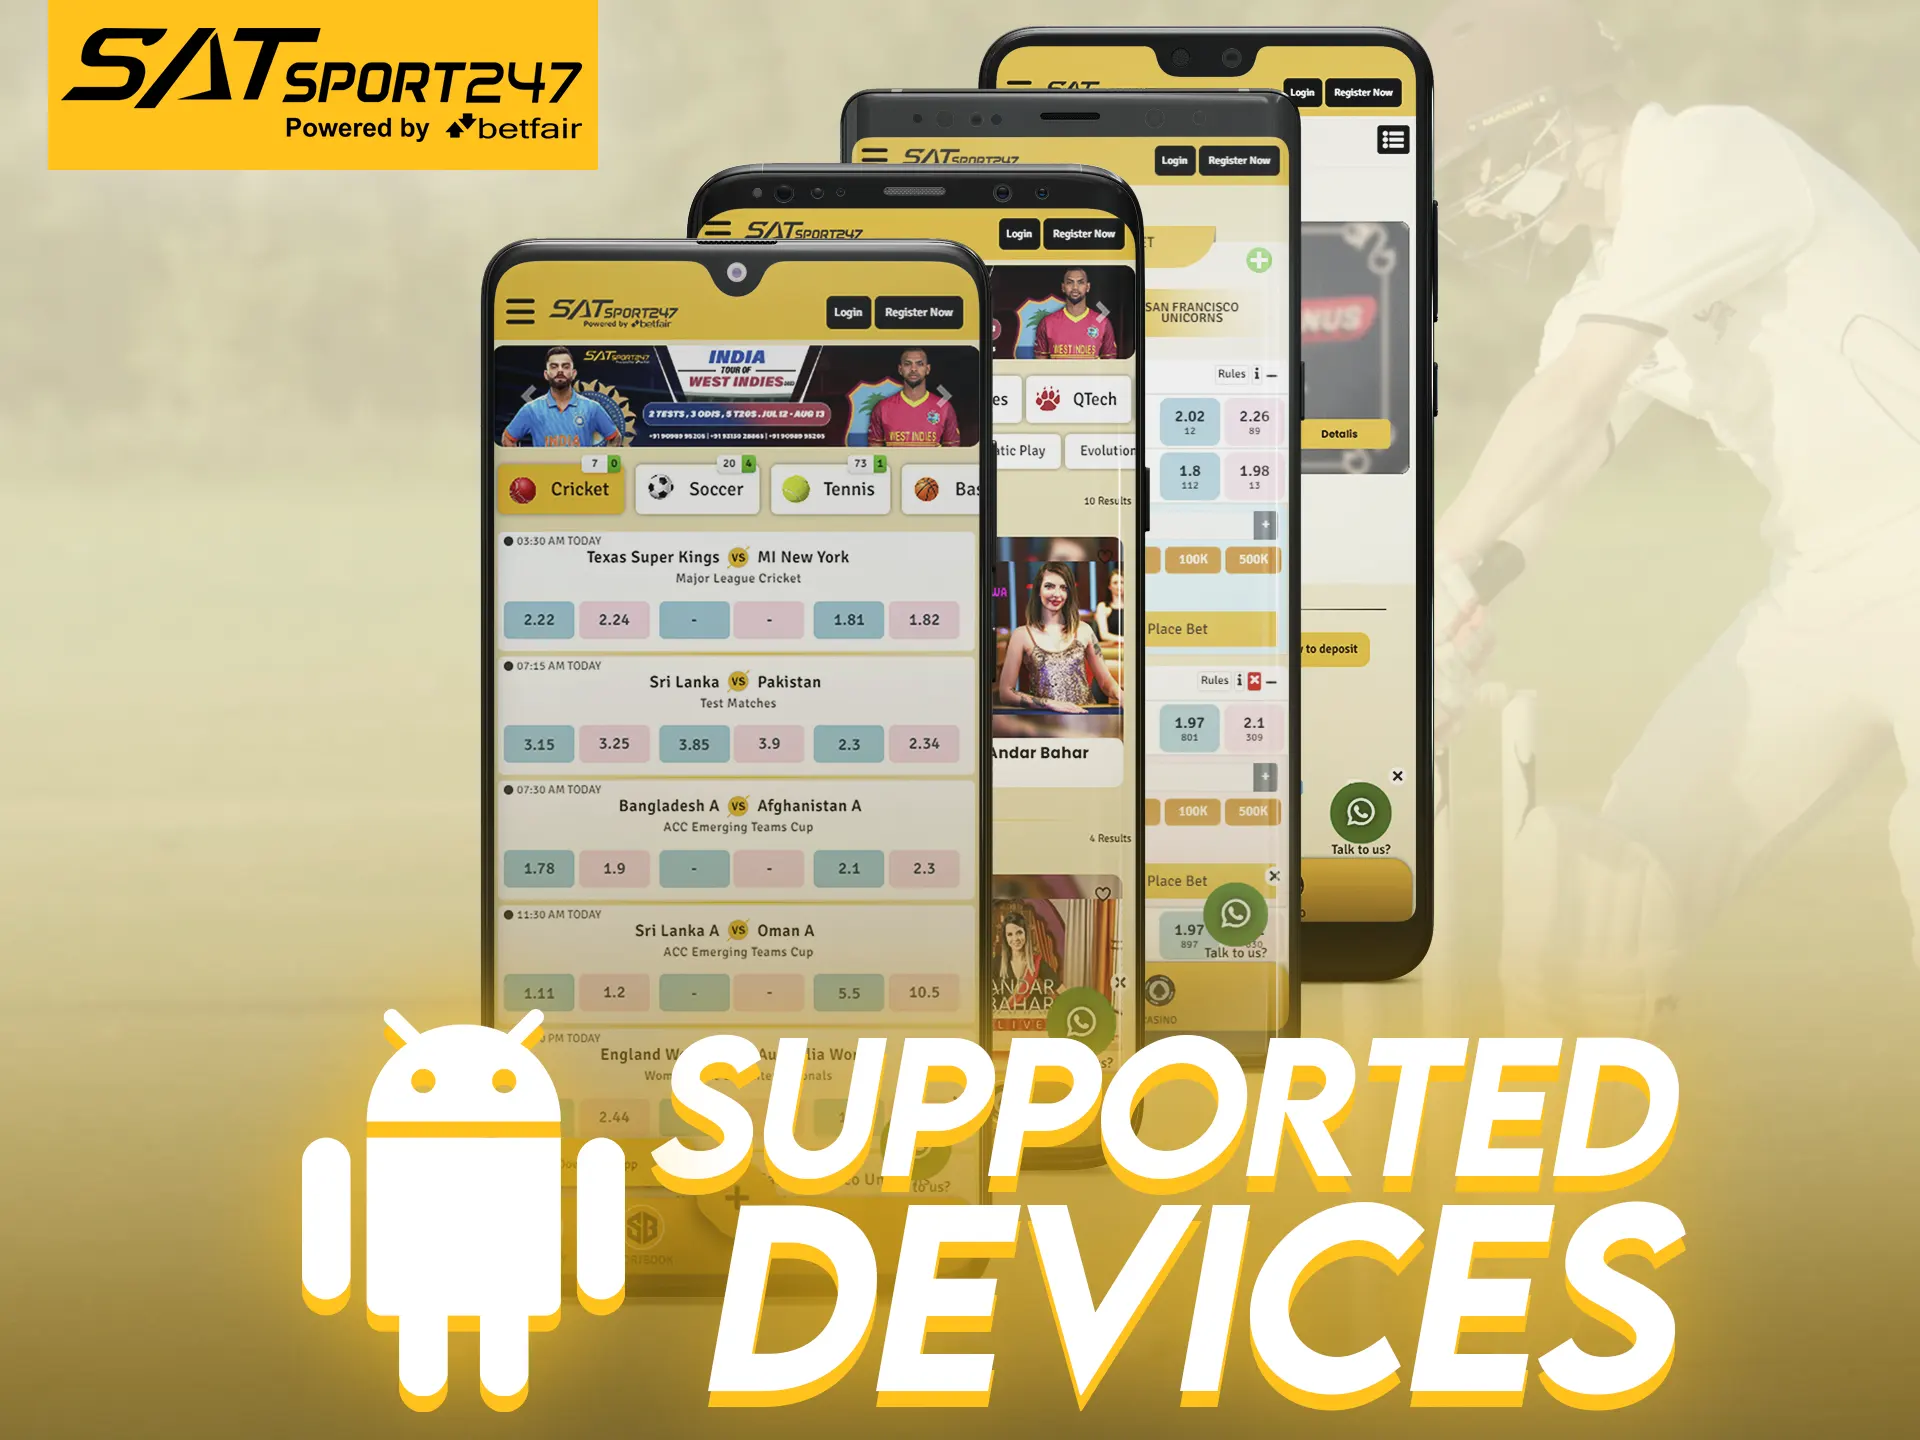 The Satsport247 app can be installed on a variety of Android devices.